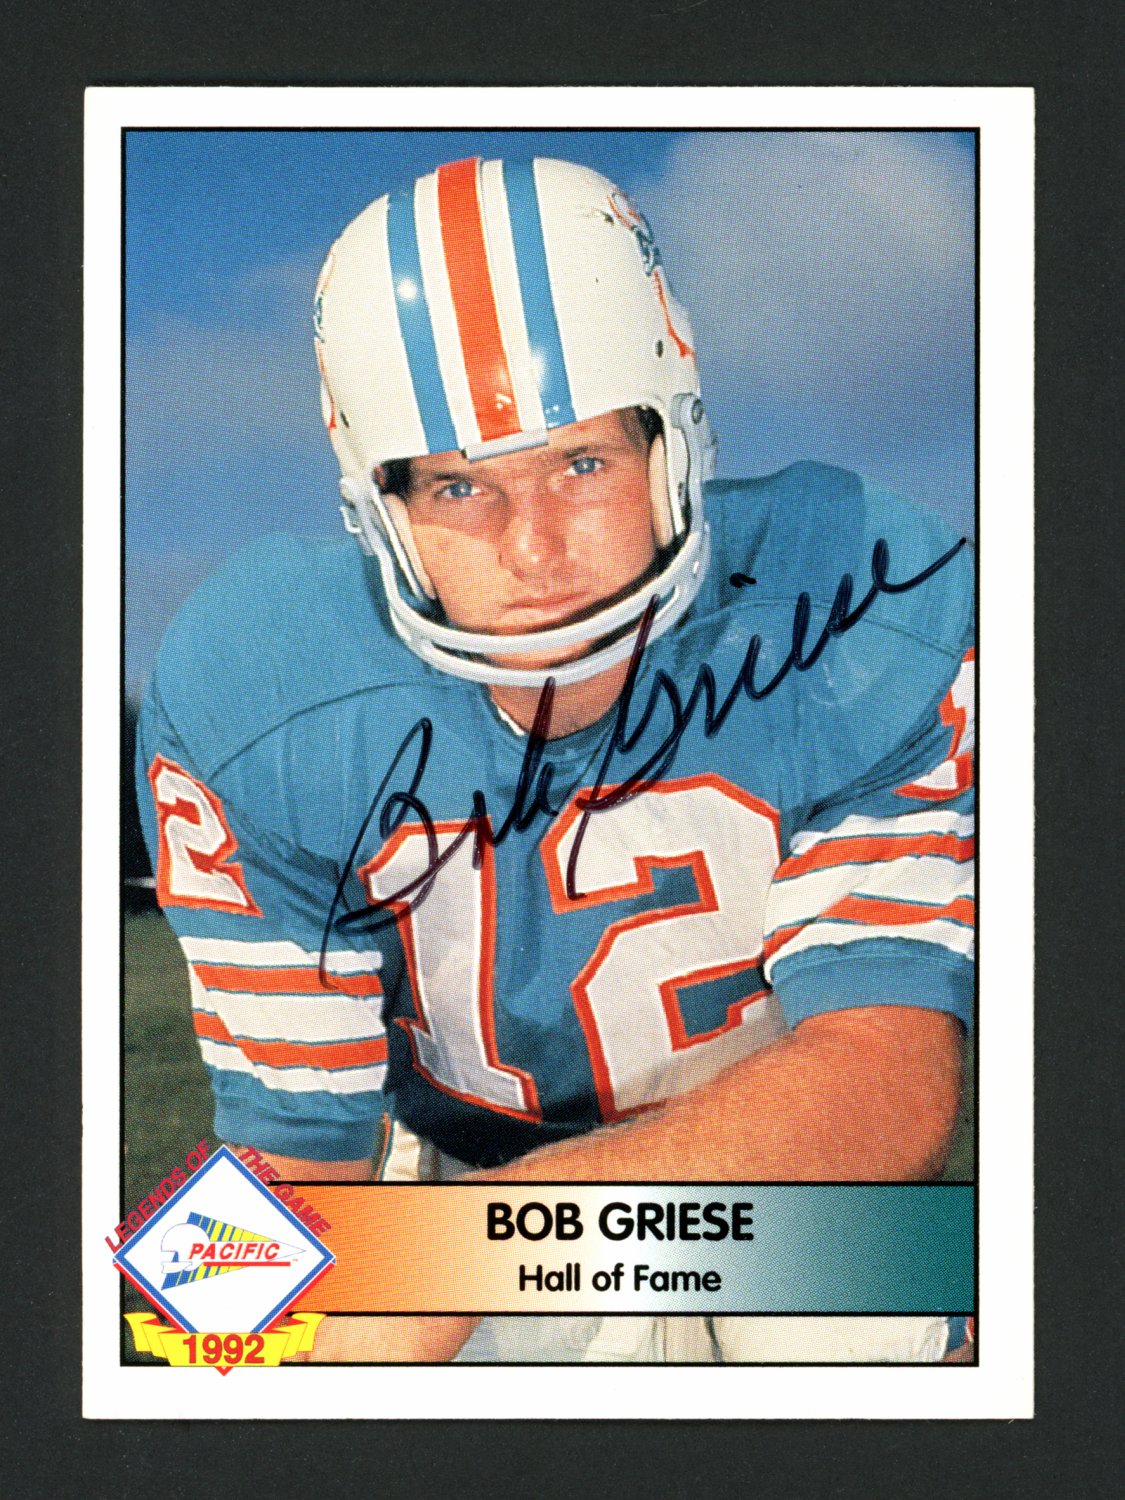 Bob Griese Autographed Signed 1992 Pacific Card Miami Dolphins